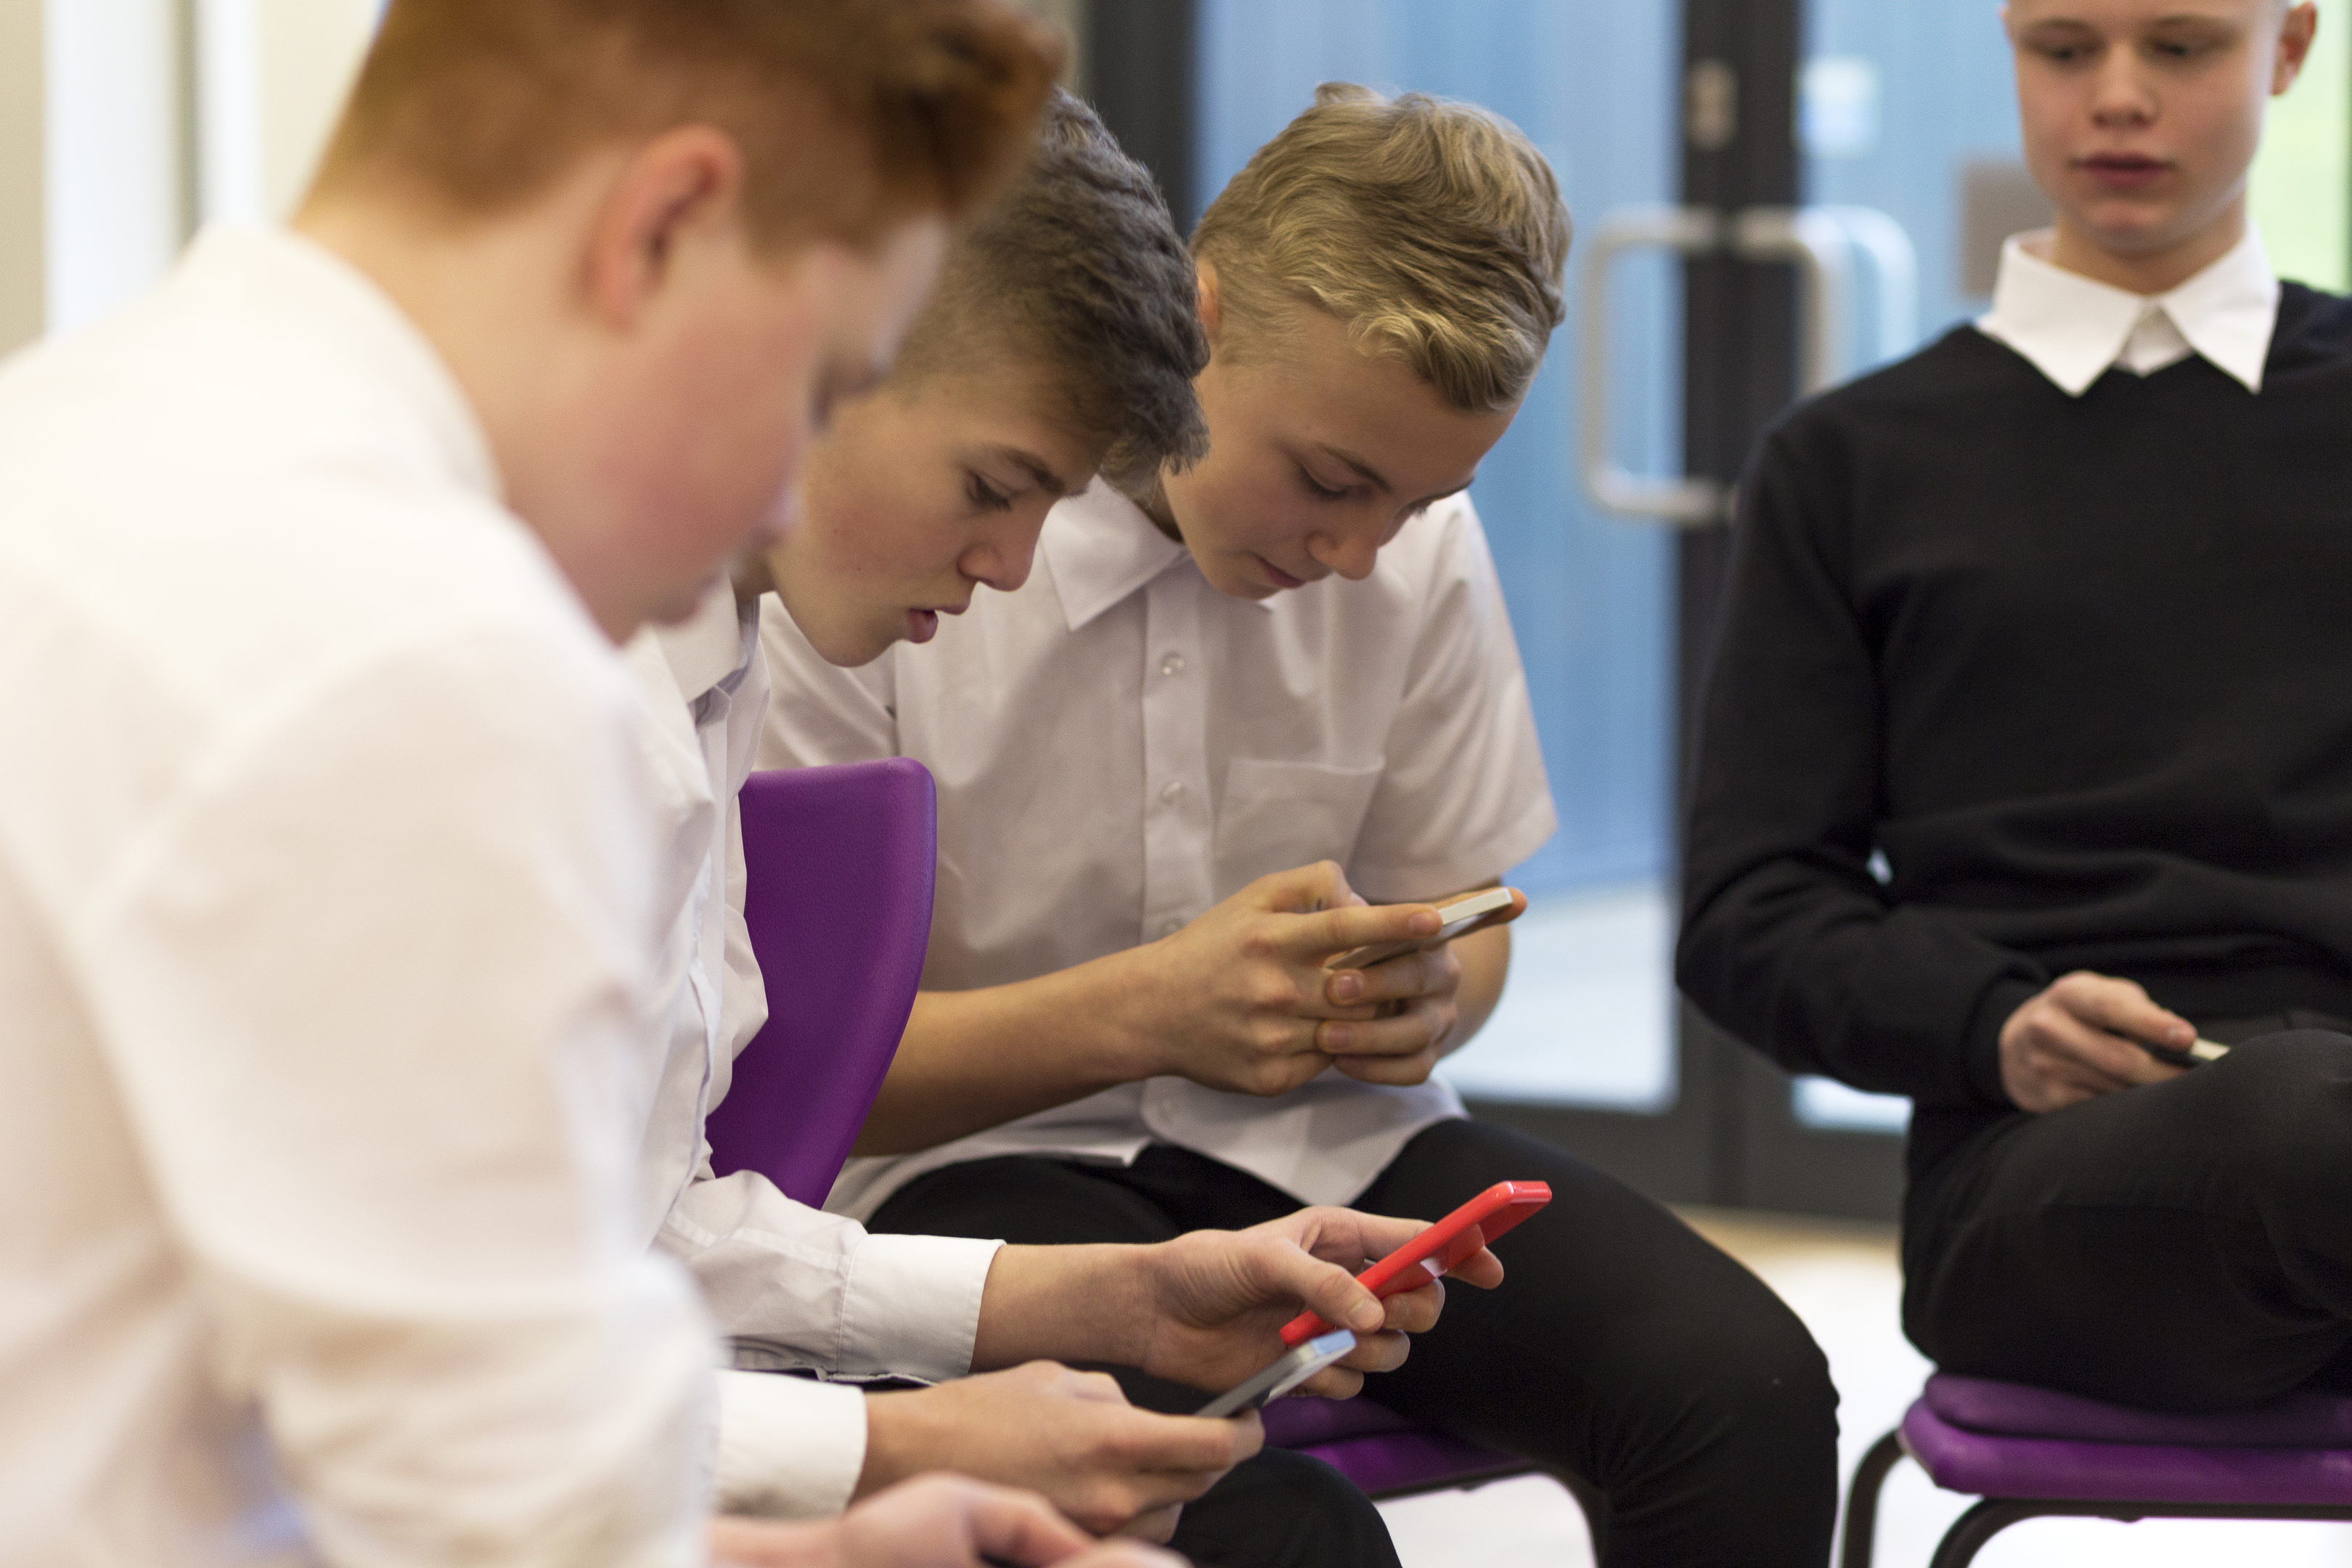 Michelle Ballantyne wants a ban on phones in primary schools and the introduction of restrictions on their use in secondary schools if headteachers deem it necessary (iStock)